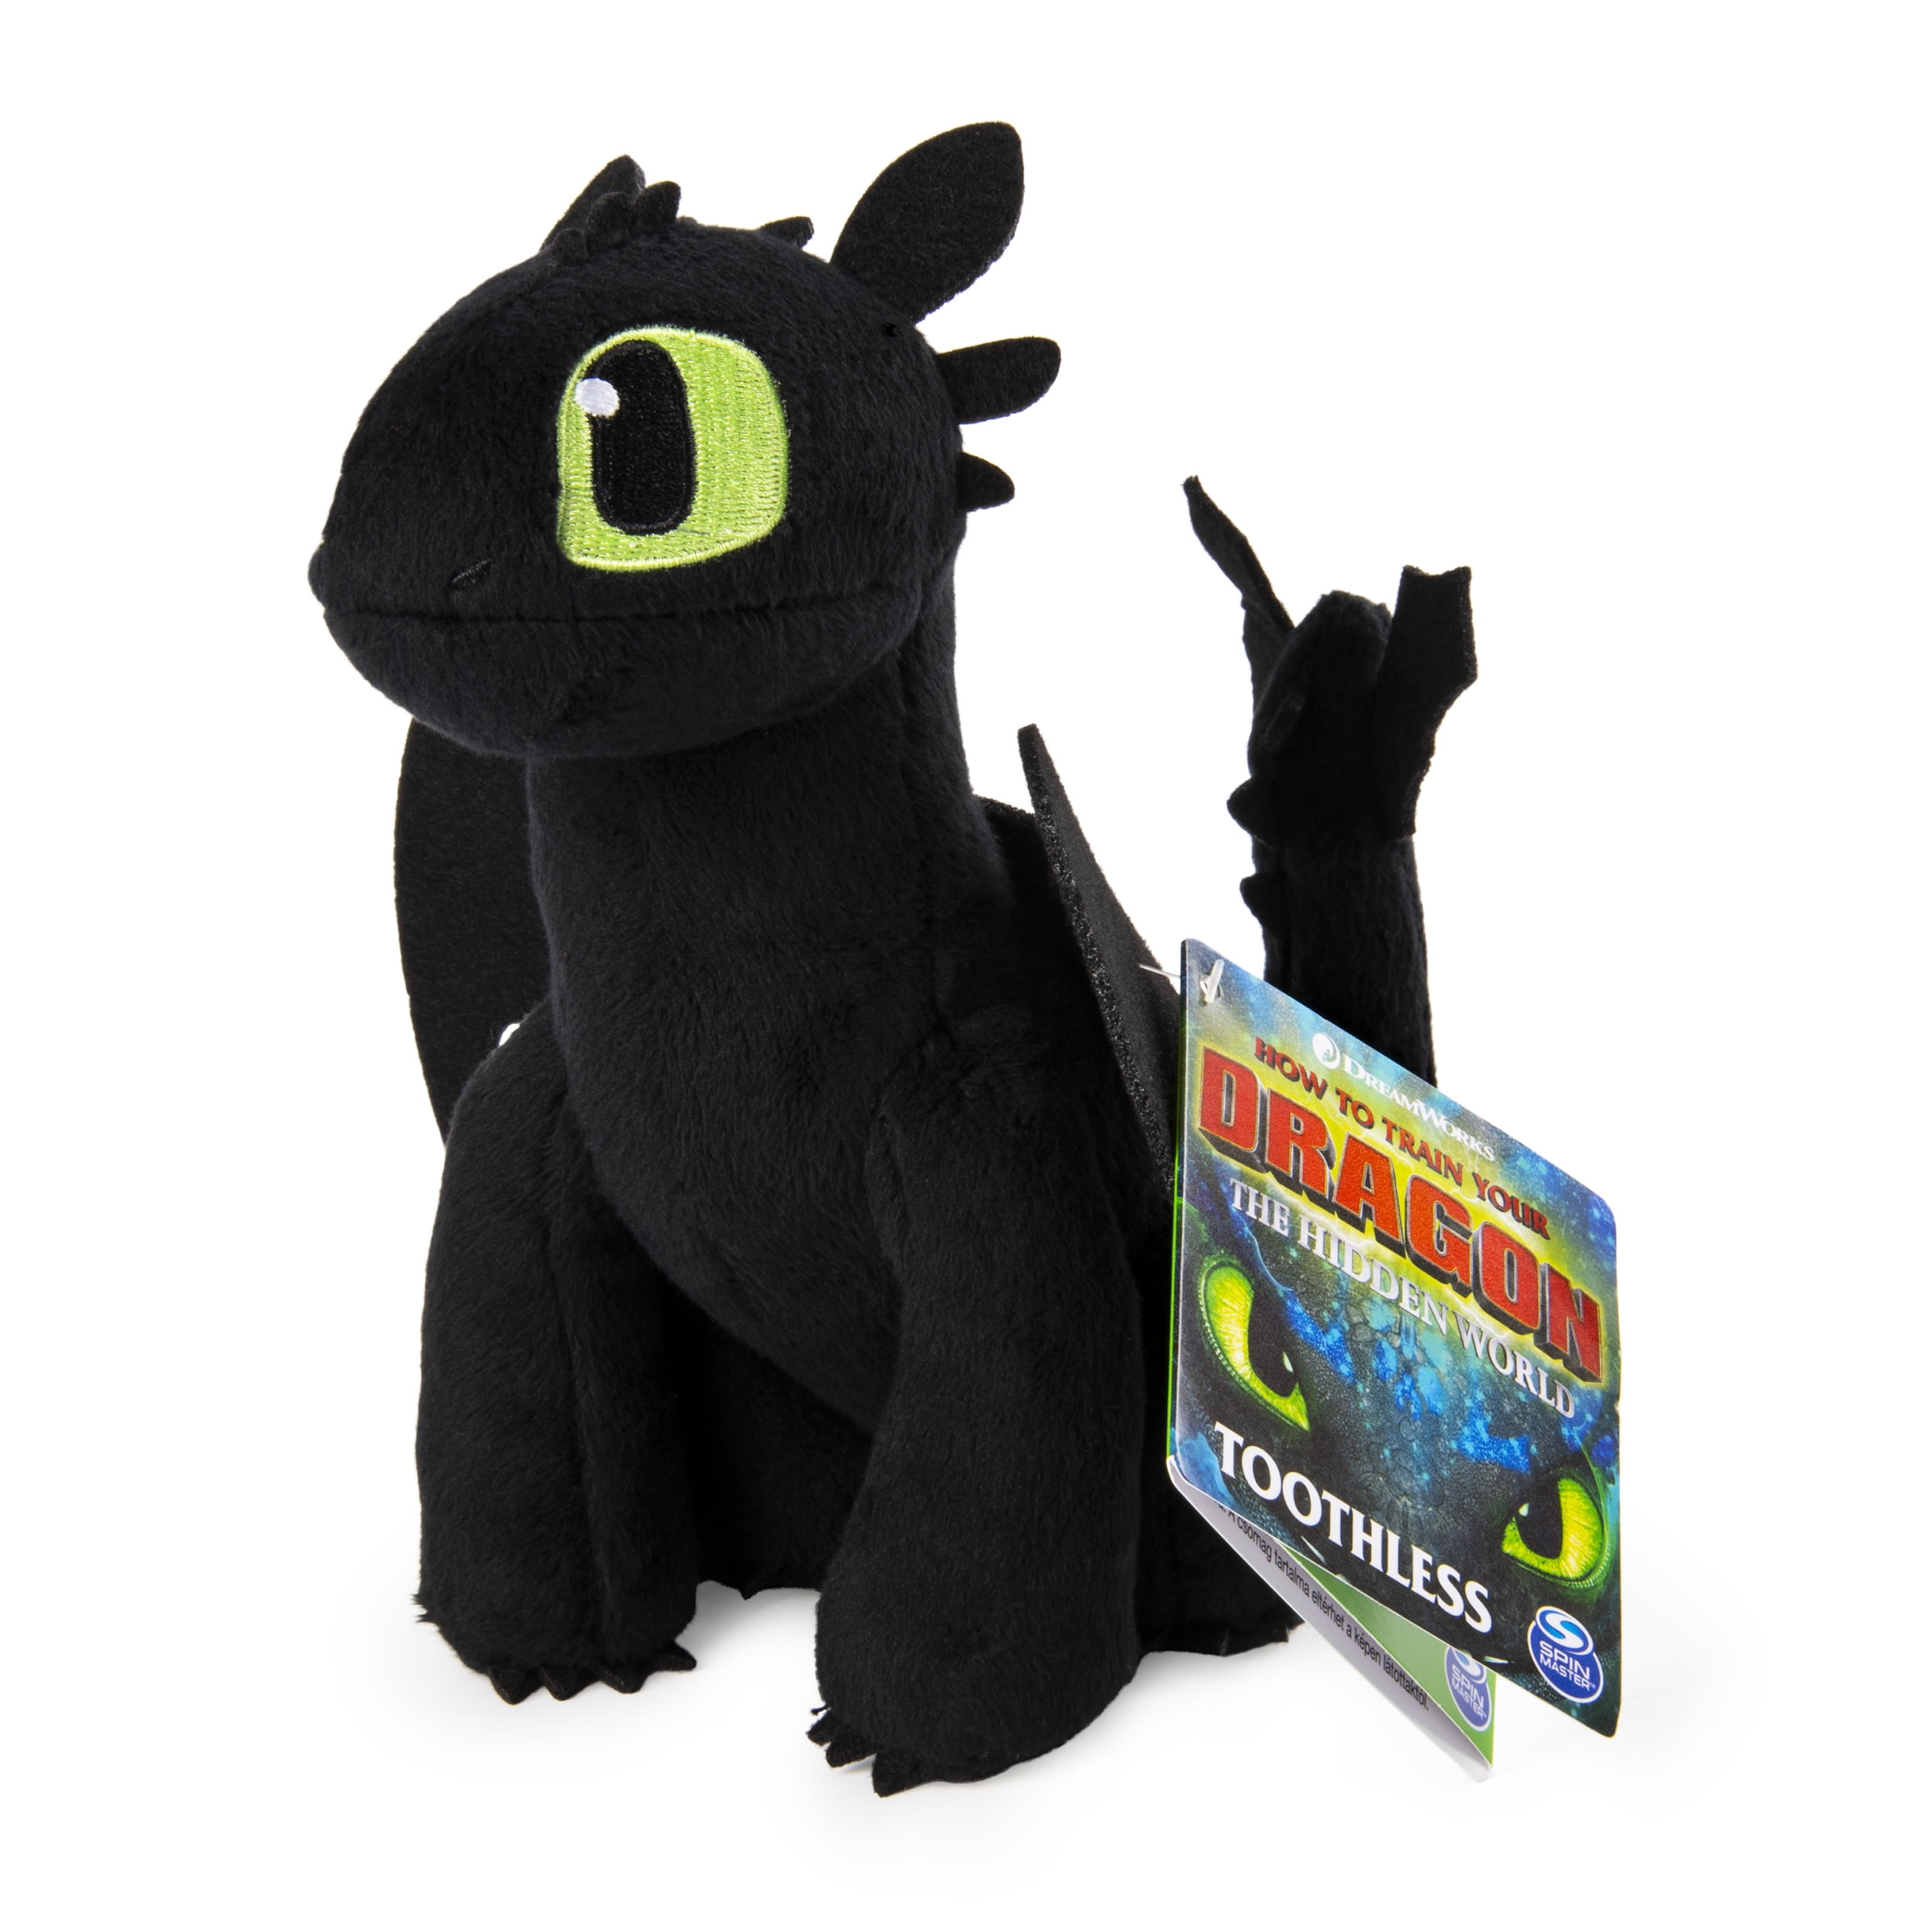 Dragons 6046841 DreamWorks Squeeze Growl Toothless peluche pas applicable. 